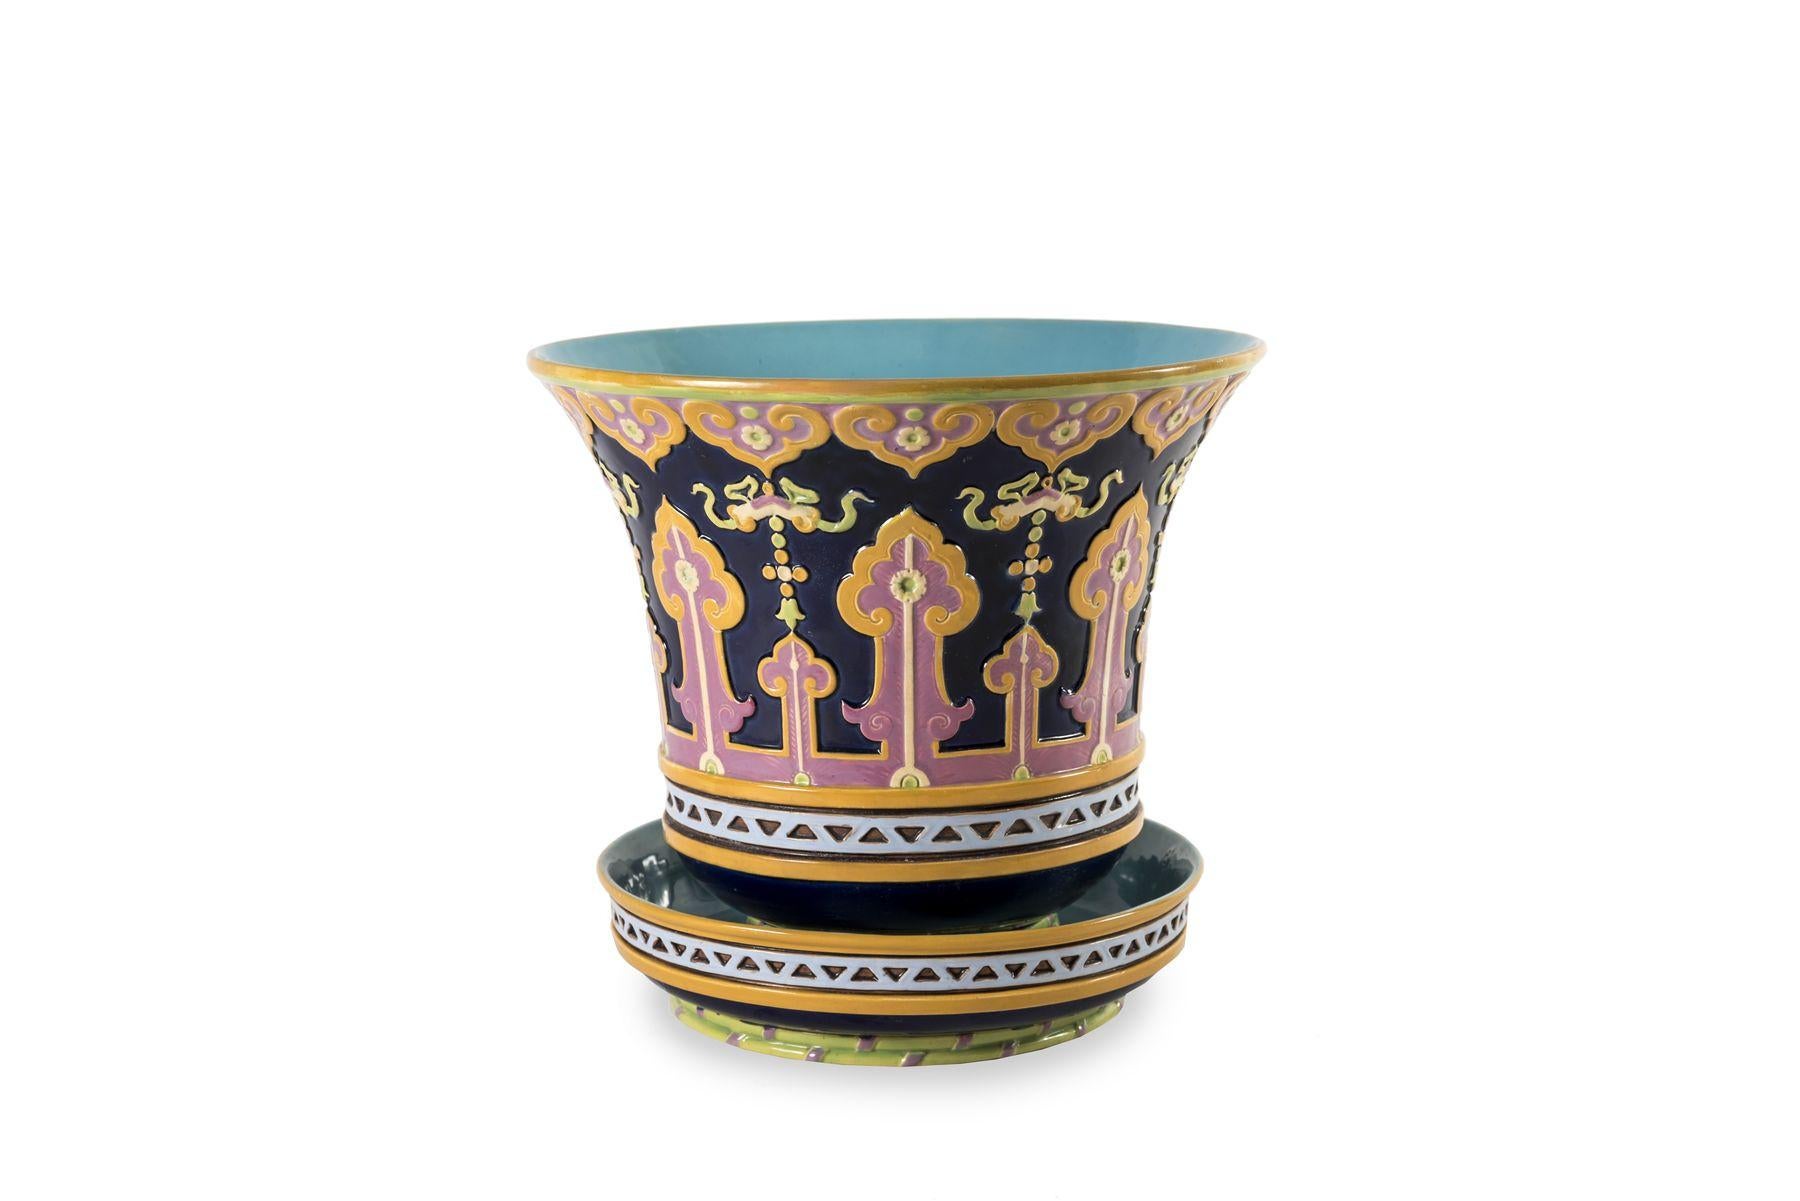 This wonderful cache-pot was made by the British manufacturer Minton. Its belly is decorated with stylised and colourful vegetal motifs typical of the palette of this manufacture. The base of the planter is decorated with a frieze of triangles